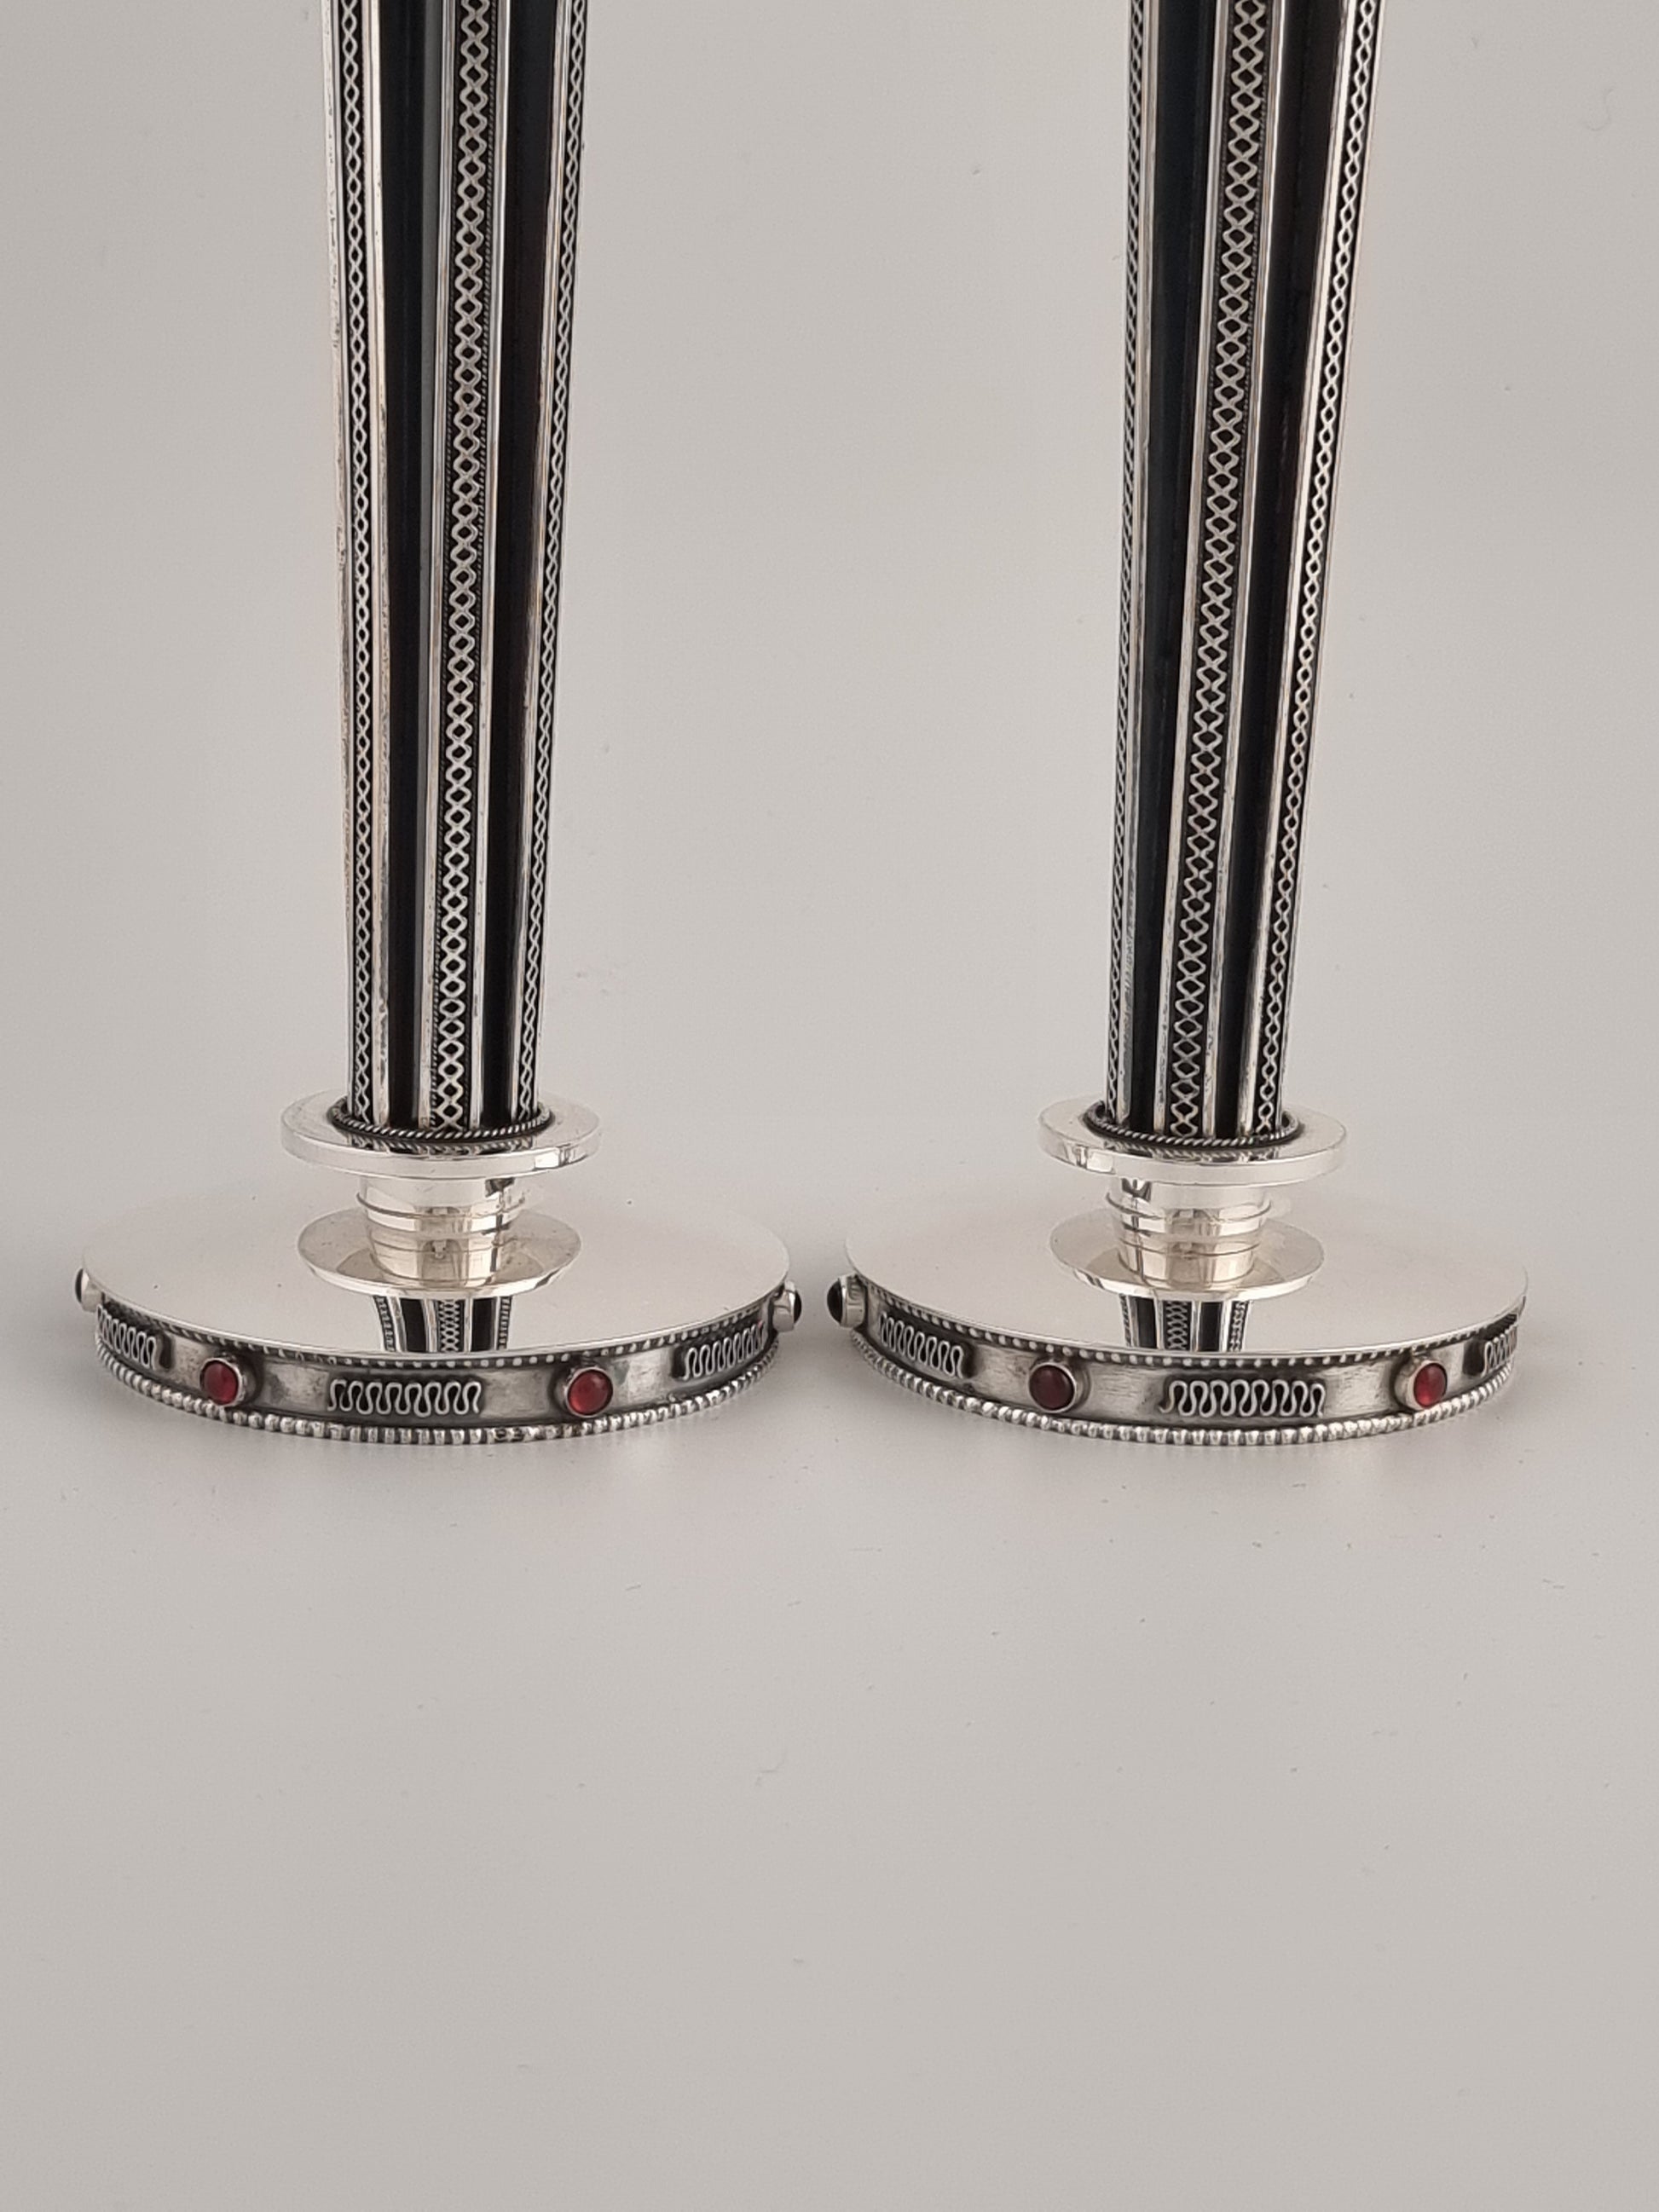 The wide smooth base supports the long pillars of these magnificent candle holders.